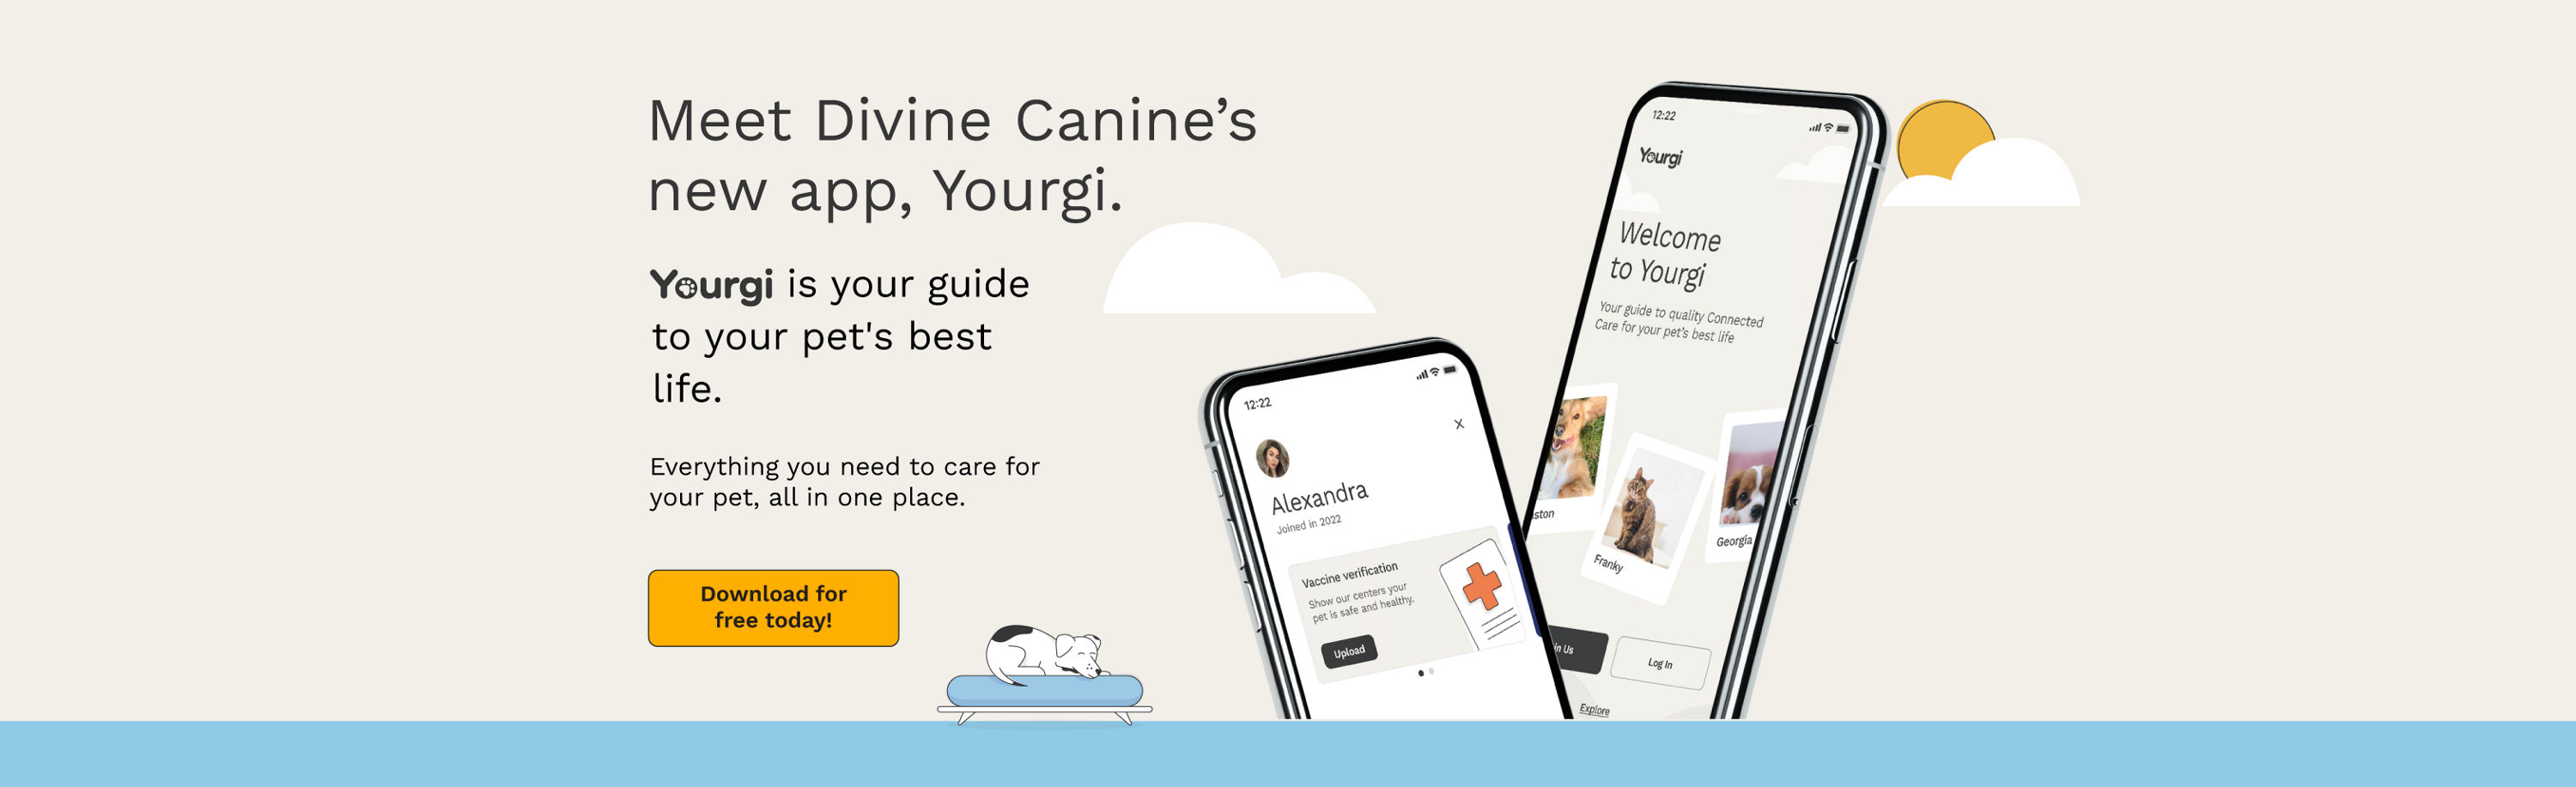 Meet Divine Canine's new app, Yourgi.